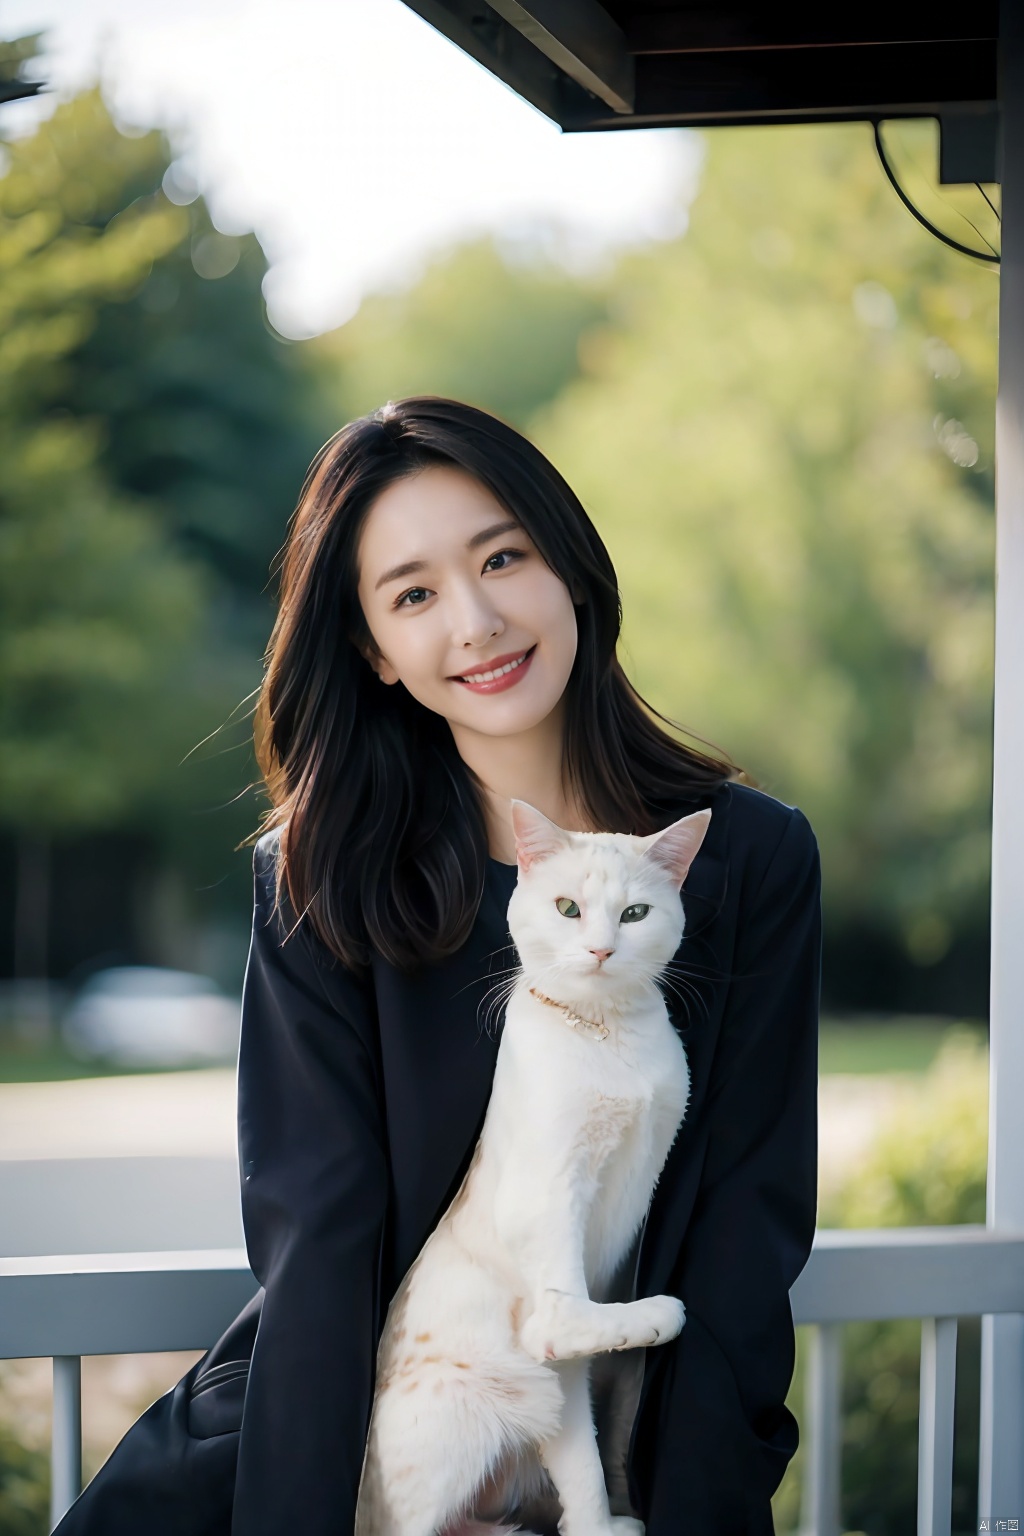  The image features a beautiful young Asian woman with long, dark hair sitting on a balcony with a cat in the background. The woman is looking into the camera with a smile on her face, her eyes sparkling with joy and contentment. Her hair is neatly styled and her makeup is natural yet enhance her features. She wears a black coat that complements her skin tone. The lighting in the image is natural and warm, casting a soft glow on the woman and the surrounding environment. The colors in the image are vibrant and rich, with the blue sky and green trees in the background providing a beautiful contrast to the woman and the cat. The style of the image is casual yet elegant, with the woman's outfit and the setting creating a relaxed and comfortable atmosphere. The quality of the image is excellent, with sharp details and smooth transitions between colors and tones. The woman's action in the image is sitting and smiling, with her hands resting on the railing. Her posture and facial expression convey a sense of happiness and contentment, as if she is enjoying a peaceful and pleasant moment. The woman's expression and the overall atmosphere of the image suggest a sense of relaxation and enjoyment. She seems to be in a good mood, perhaps enjoying a leisurely day or spending time with her cat. The image captures a moment of tranquility and happiness, making it a beautiful and memorable scene.,Film Photography